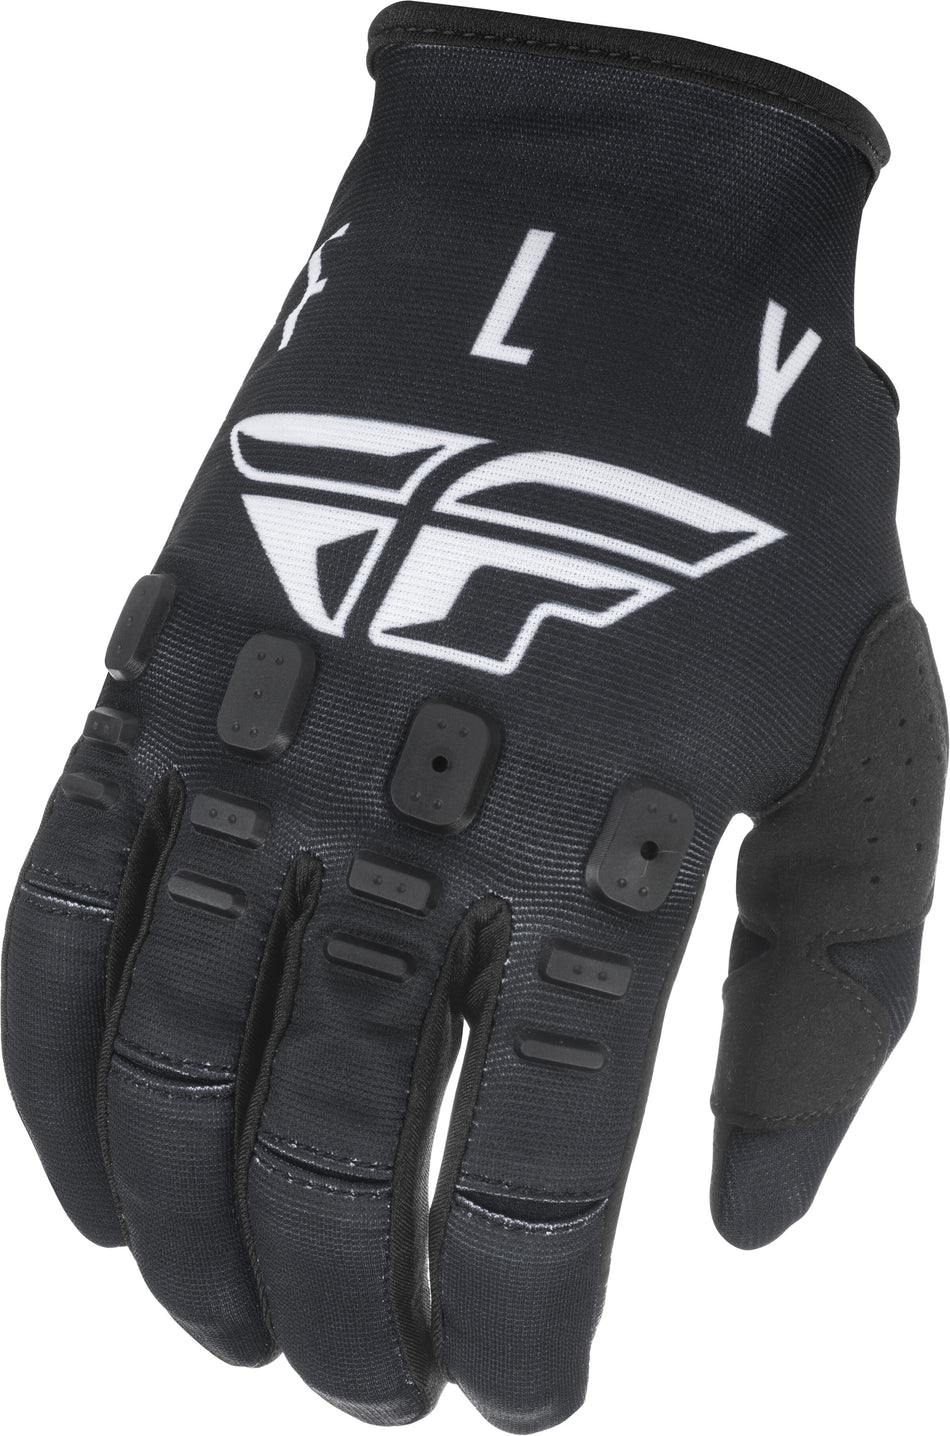 FLY RACING Youth Kinetic K121 Gloves Black/White Sz 05 374-41005